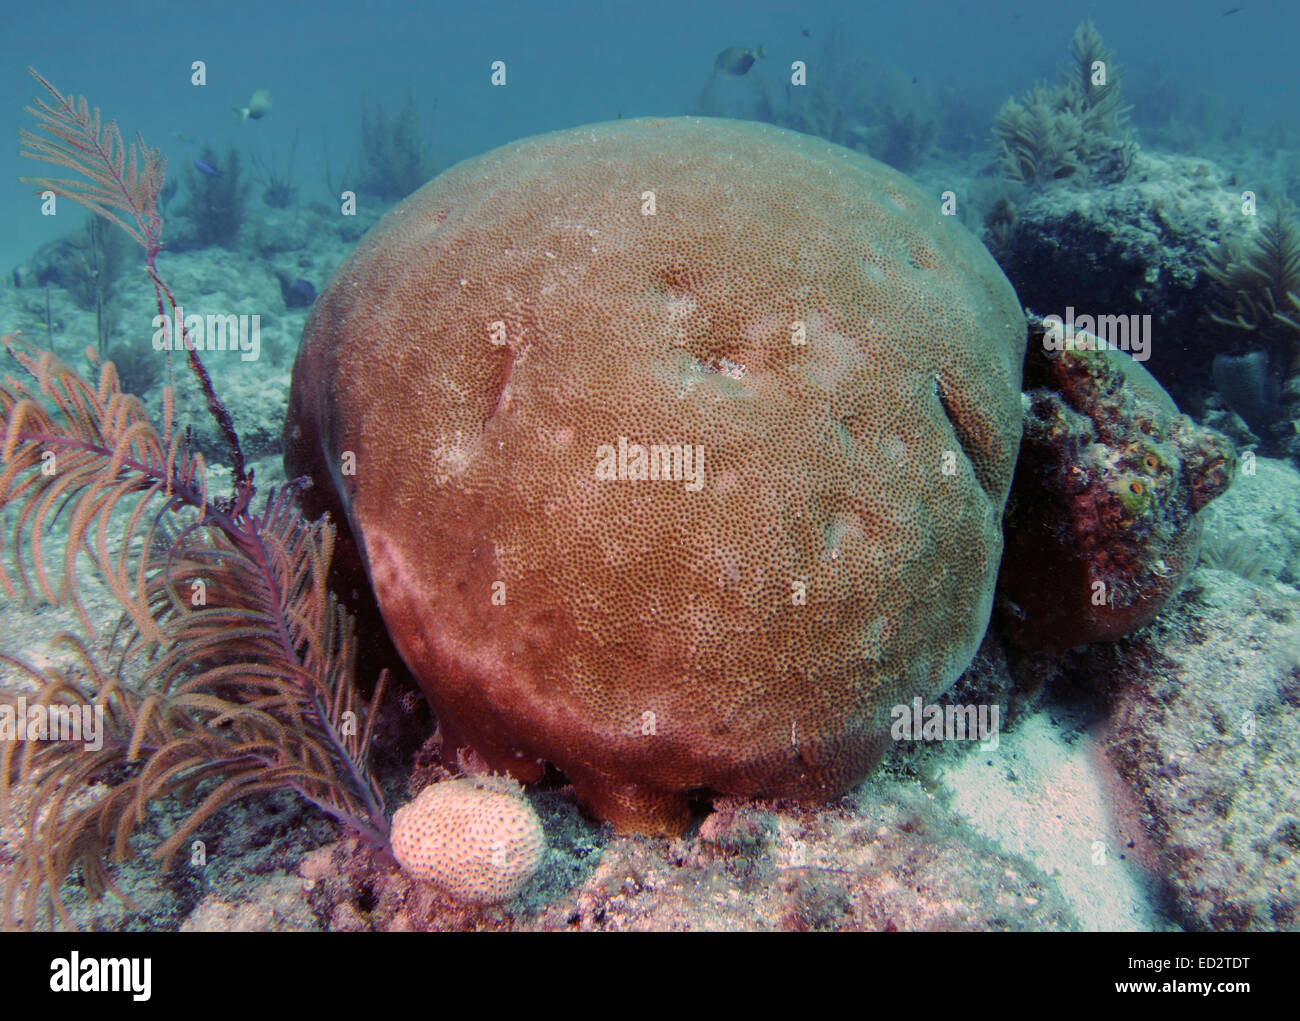 A large Blushing star coral on Molasses Reef in Key Largo, Florida Stock Photo